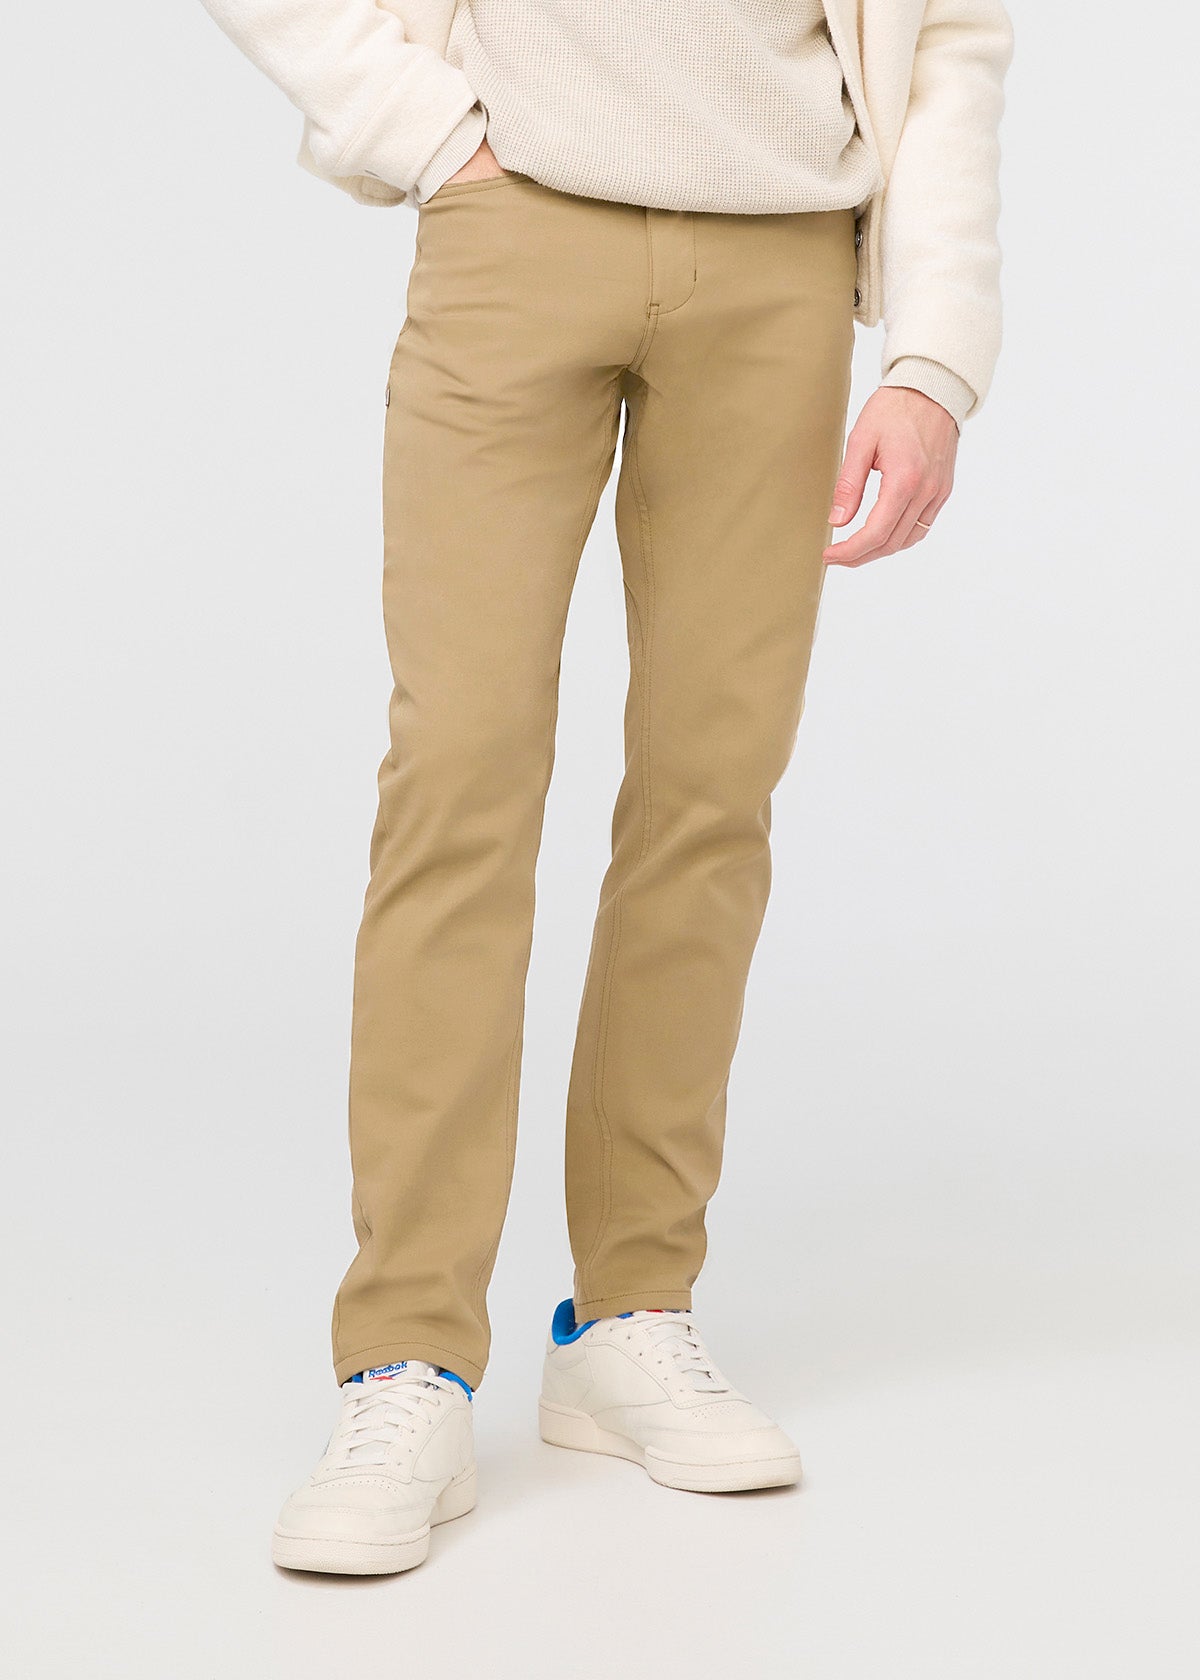 Buy Olive Track Pants for Men by Being Human Online | Ajio.com